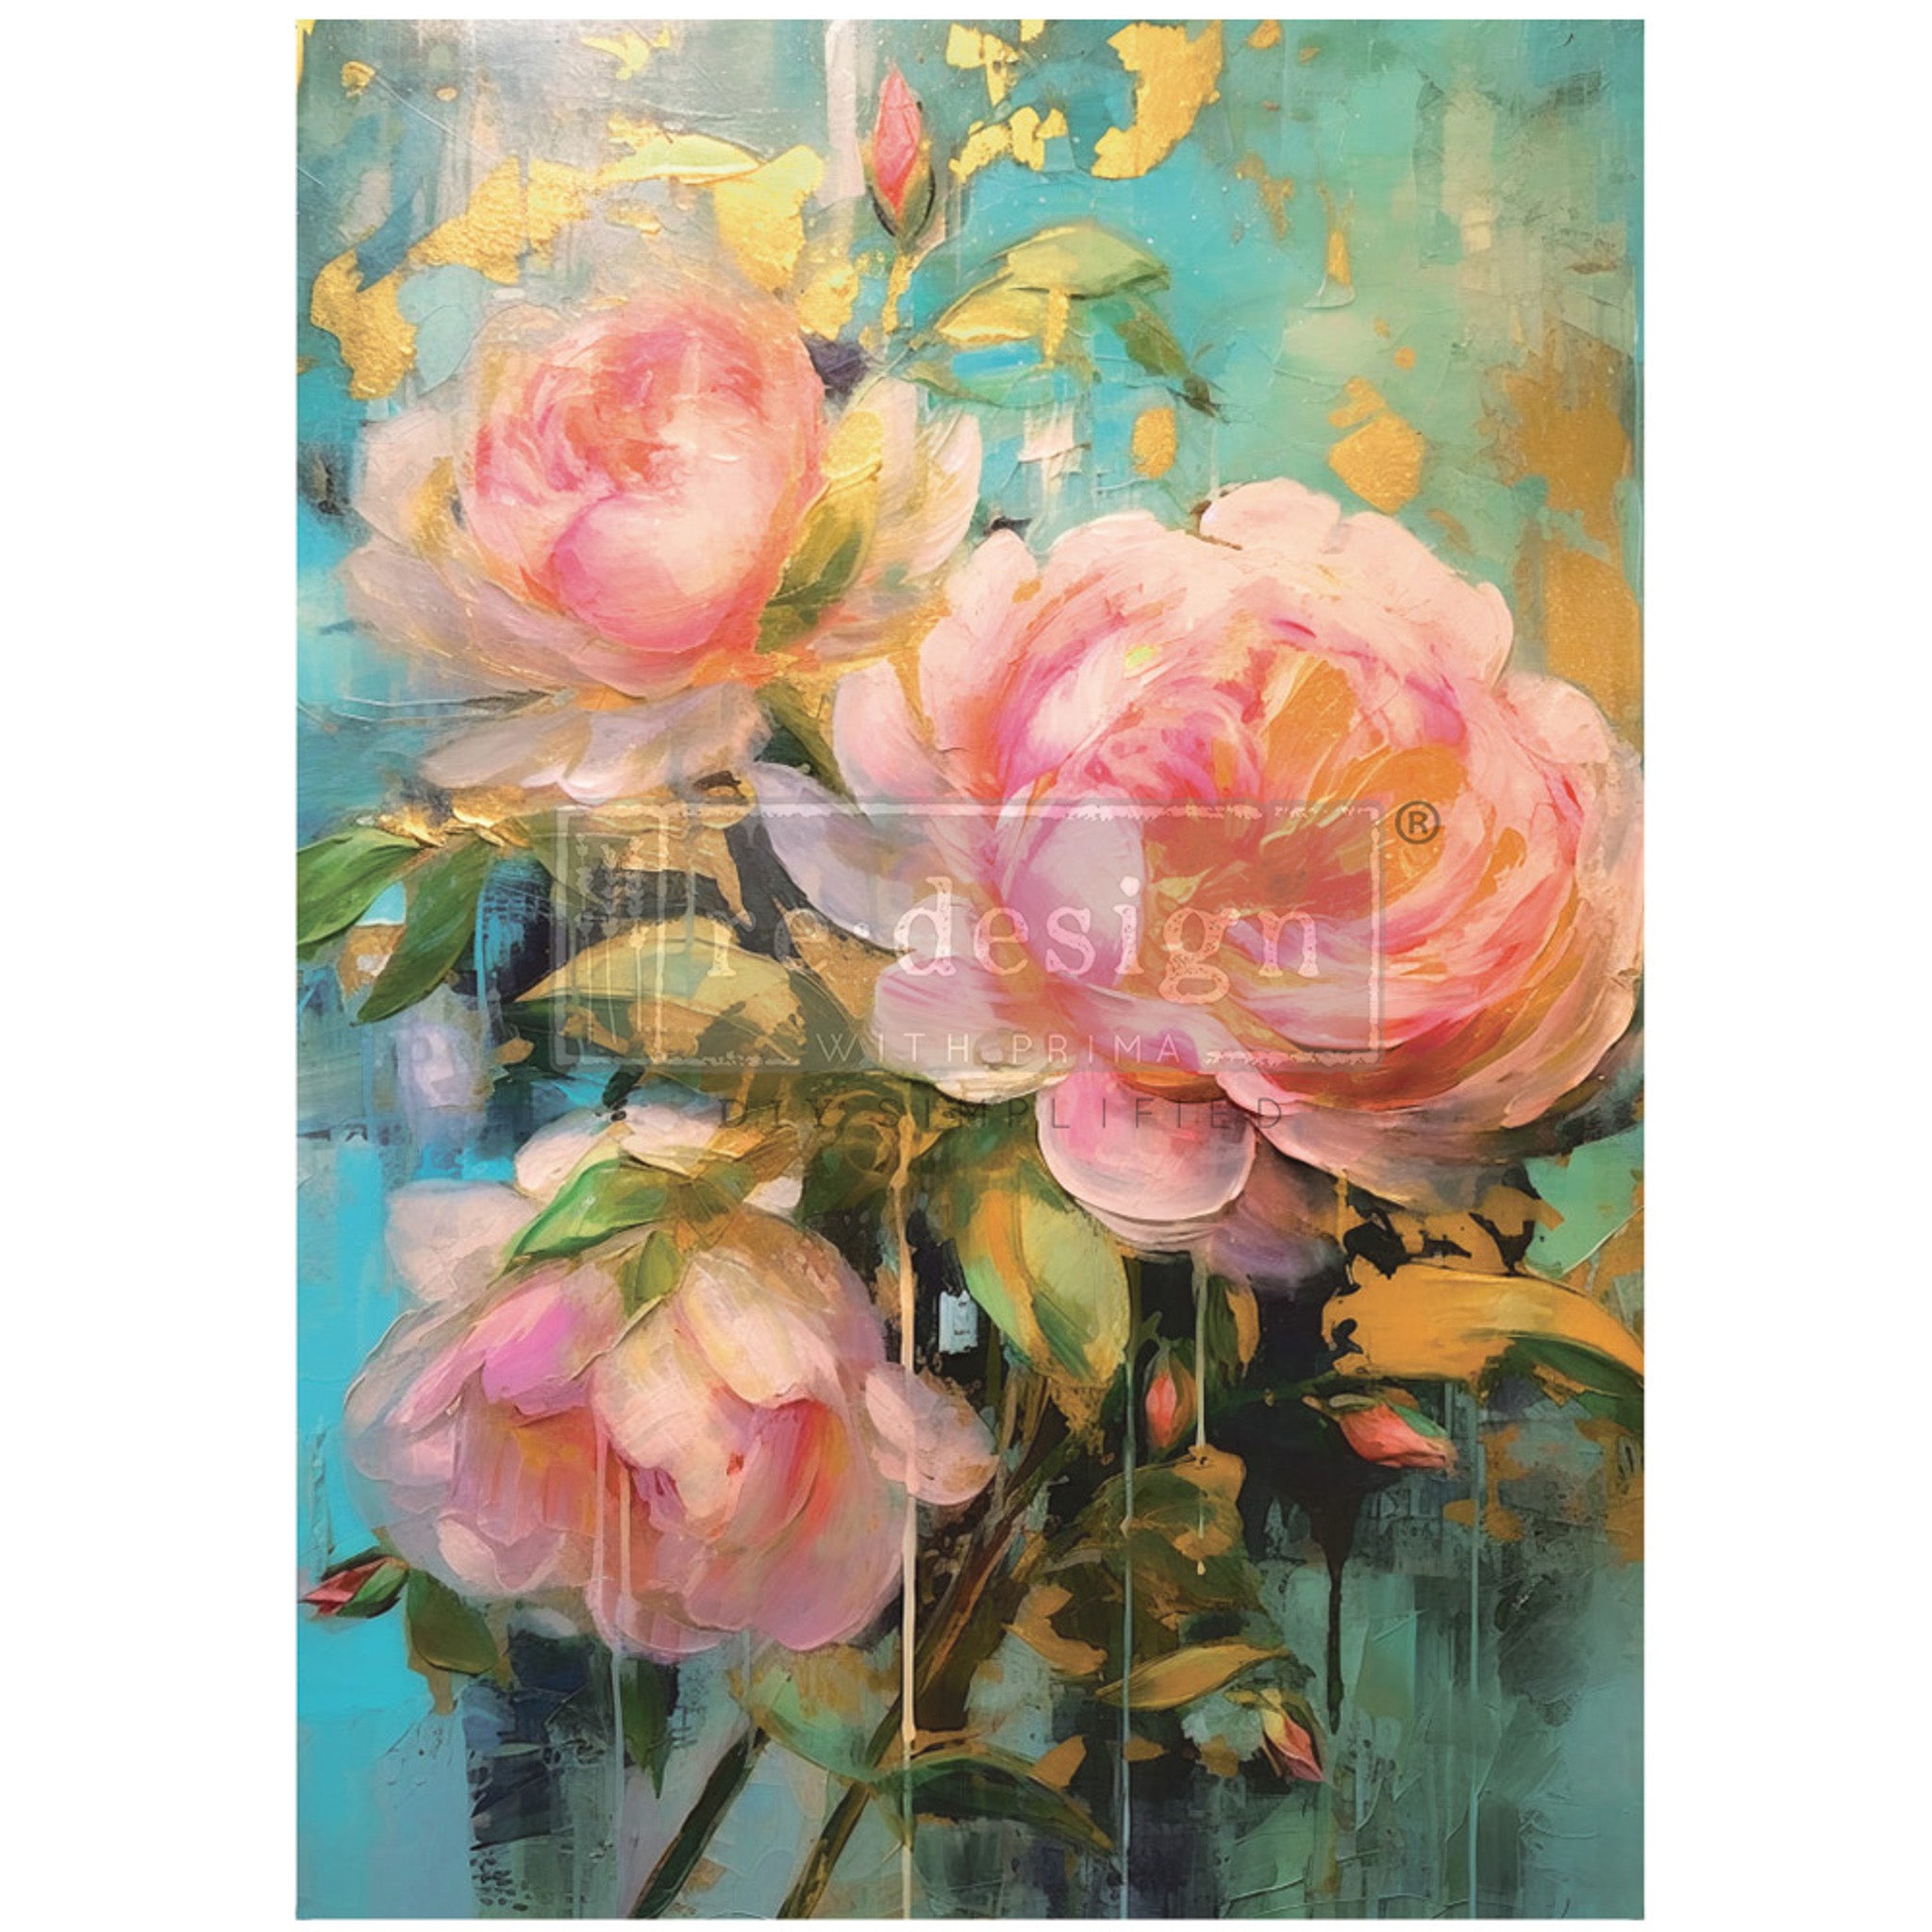 A1 fiber paper design featuring large pink flowers on a beautiful watercolor-inspired background.